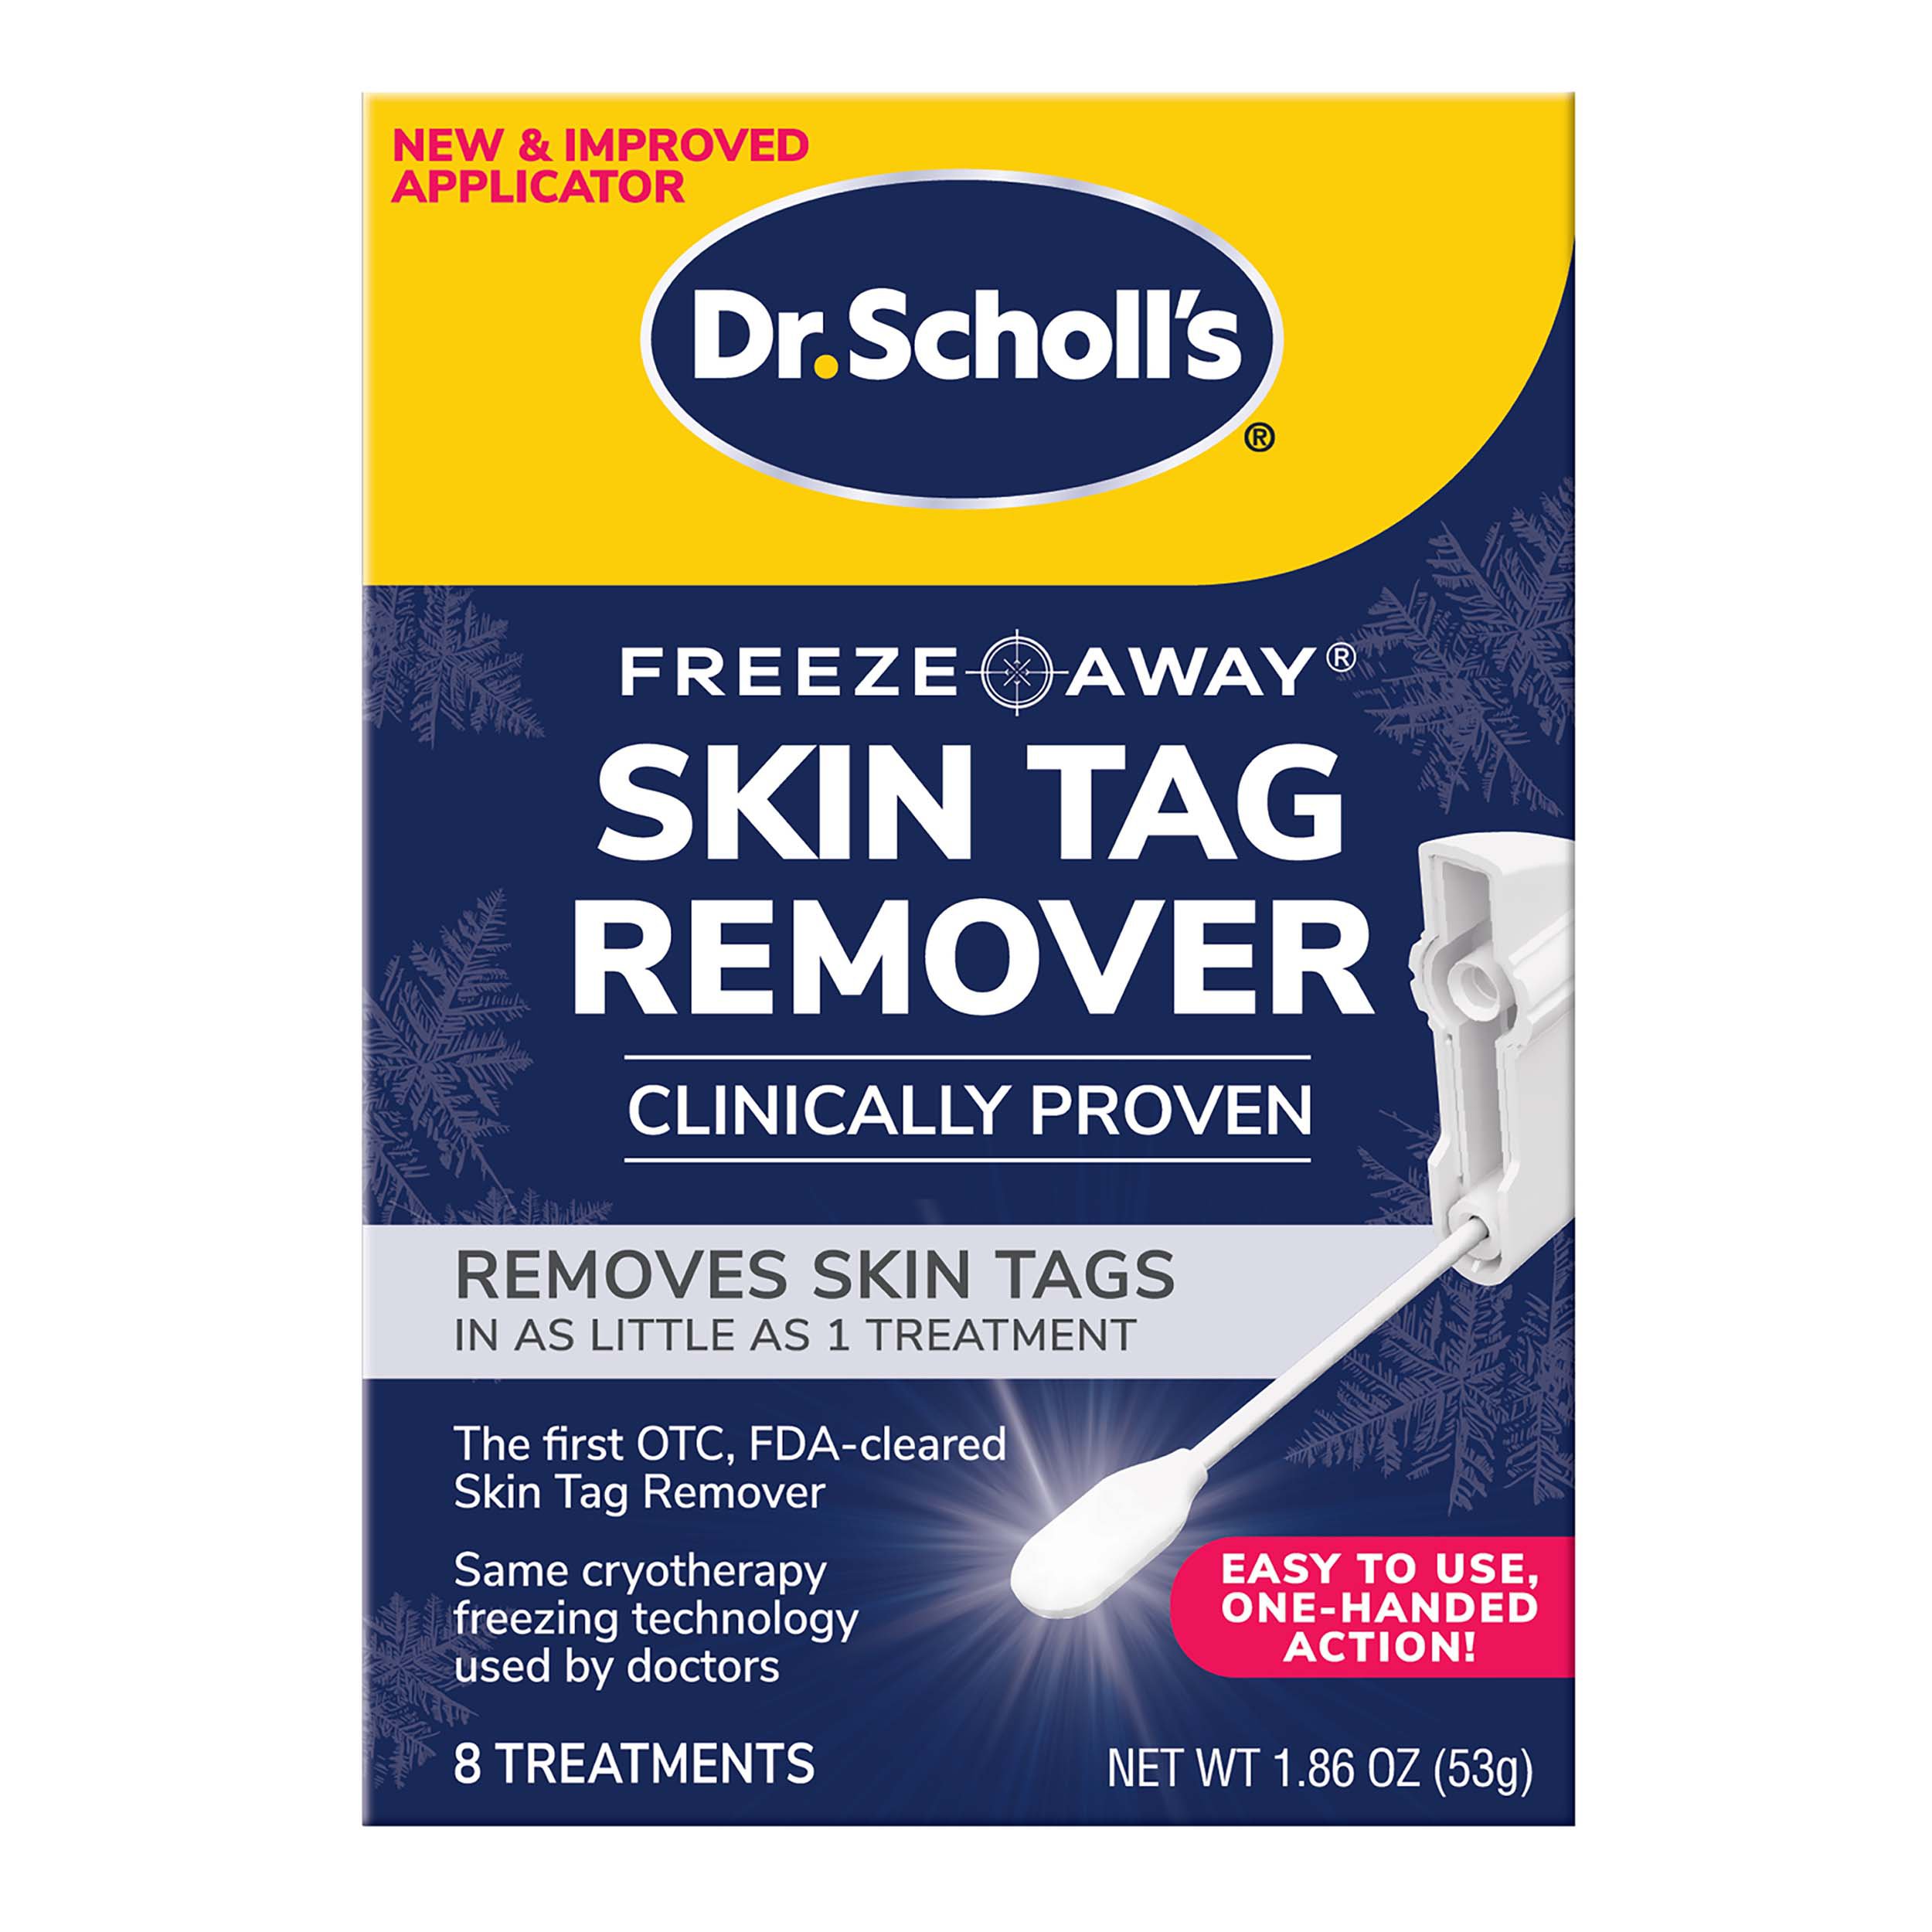 Dr. Scholl's Freese Away Max Wart Remover - Shop Skin & Scalp Treatments at  H-E-B